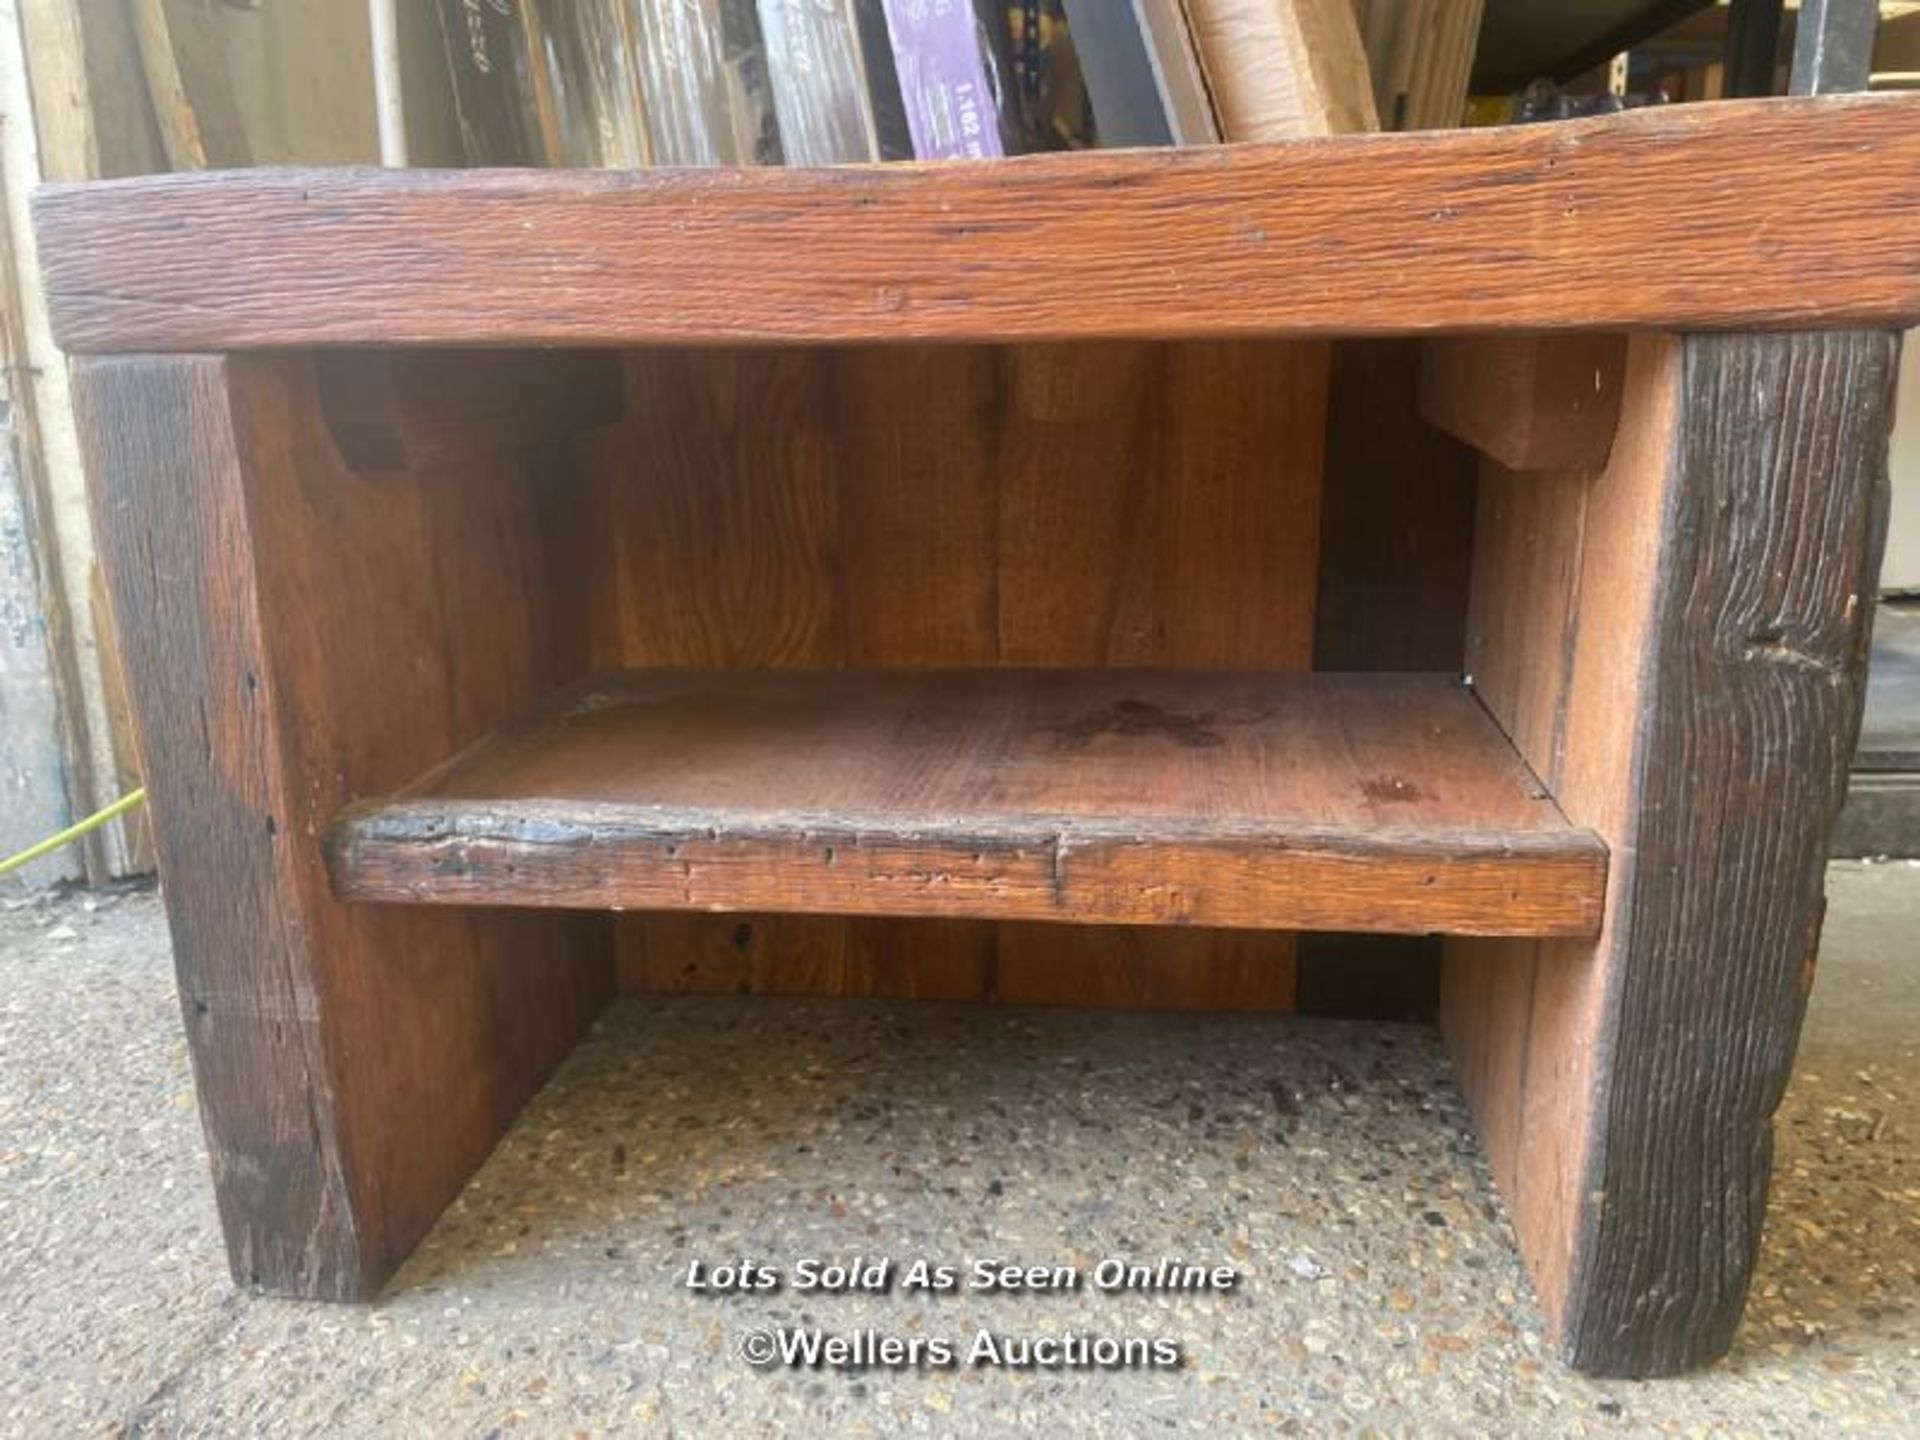 *A SMALL OAK SIDE TABLE, POSSIBLY MISSING A DRAWER. IDEAL FOR RESTORATON. 69 X 51 X 35CM - Image 5 of 6